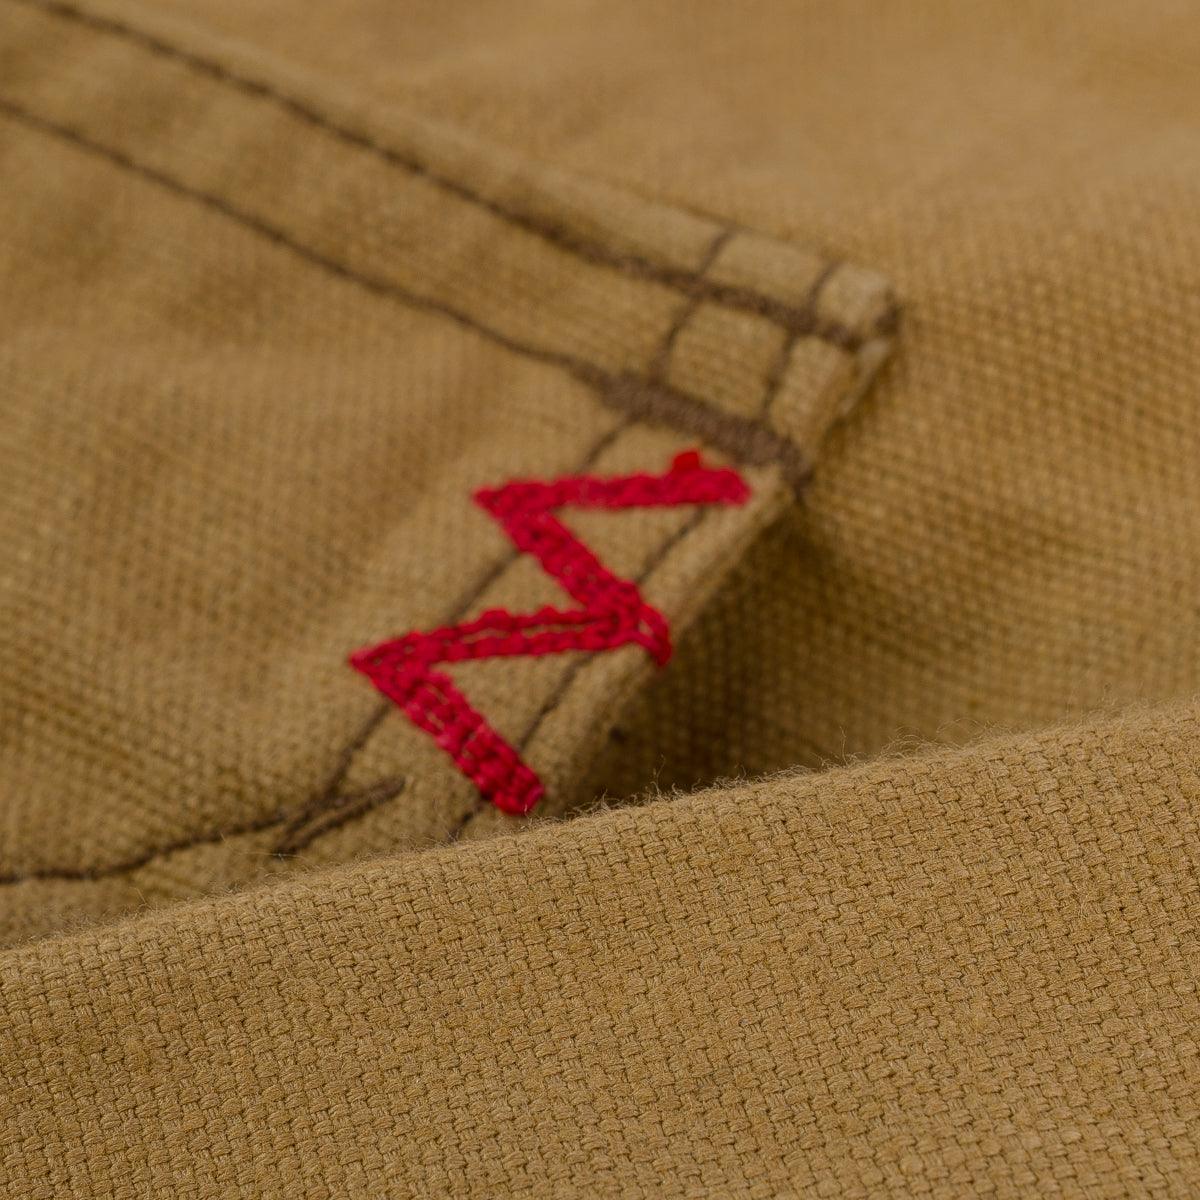 Image showing the IHJ-134-MUS - 9oz Paraffin Coated OX Type II Jacket - Mustard which is a Jackets described by the following info SS24 and sold on the IRON HEART GERMANY online store